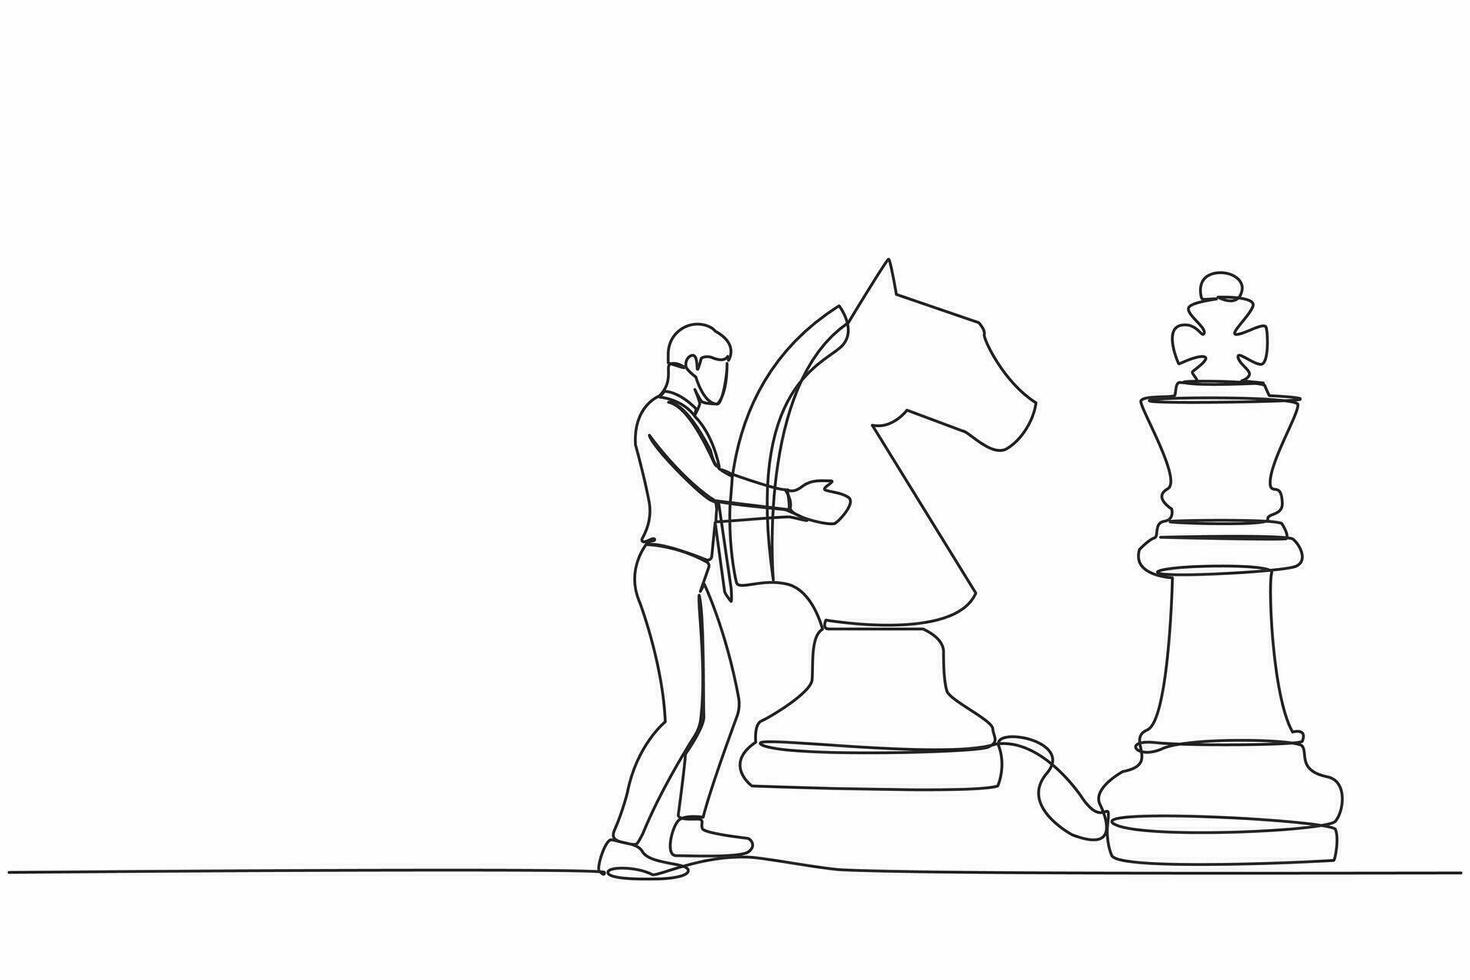 Single continuous line drawing businessman holding horse chess piece to beat king chess. Strategic planning, business development strategy, tactics in game. One line graphic design vector illustration